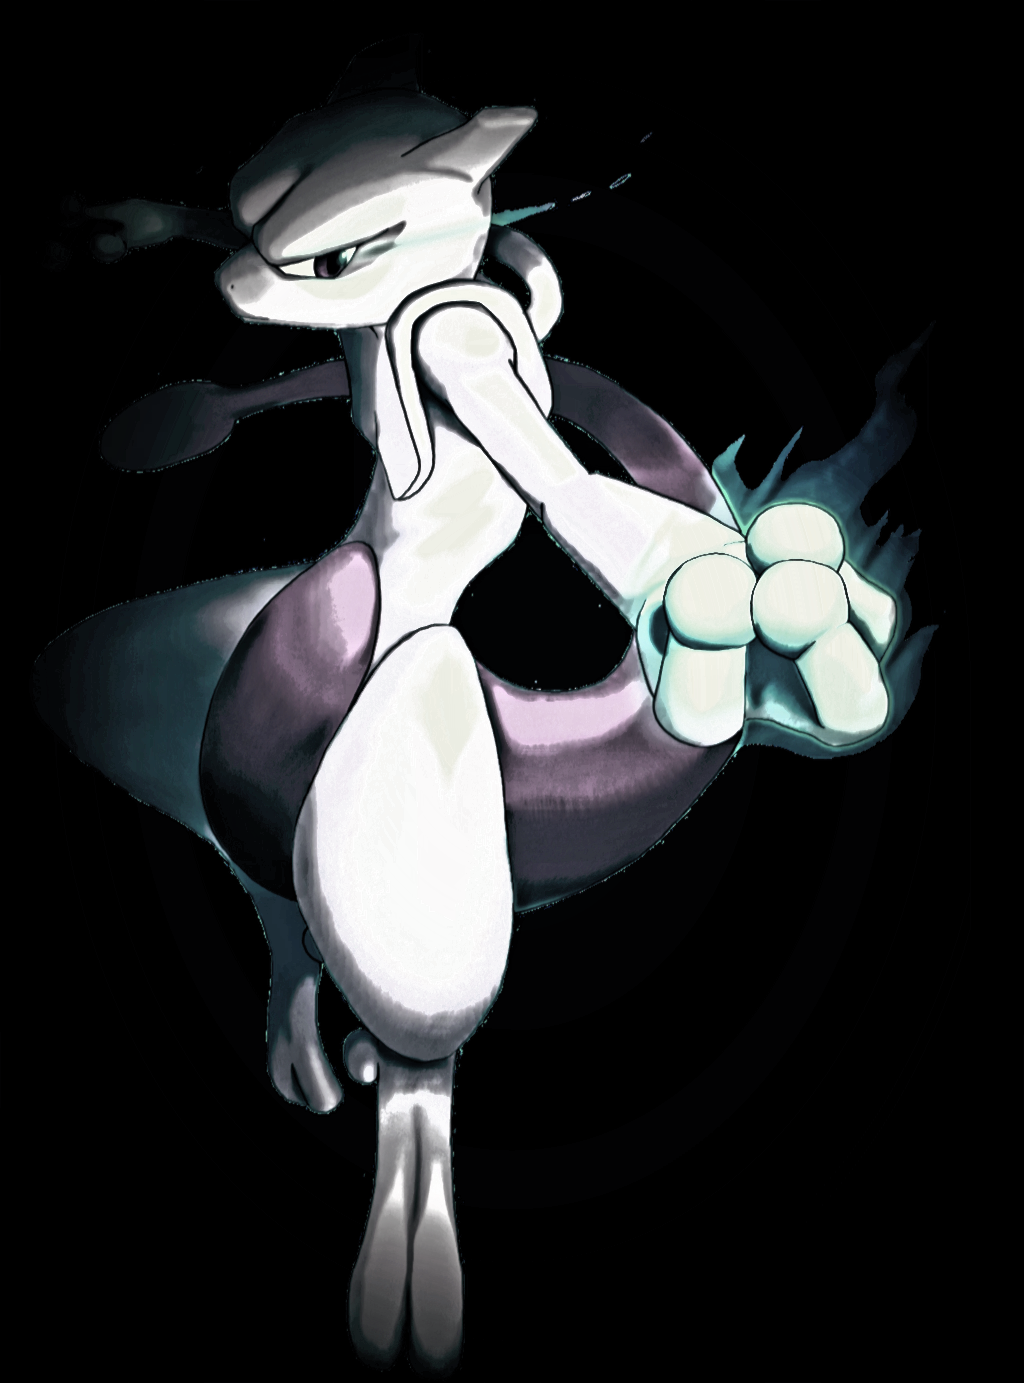 An edited Mewtwo for a phone wallpaper, requested